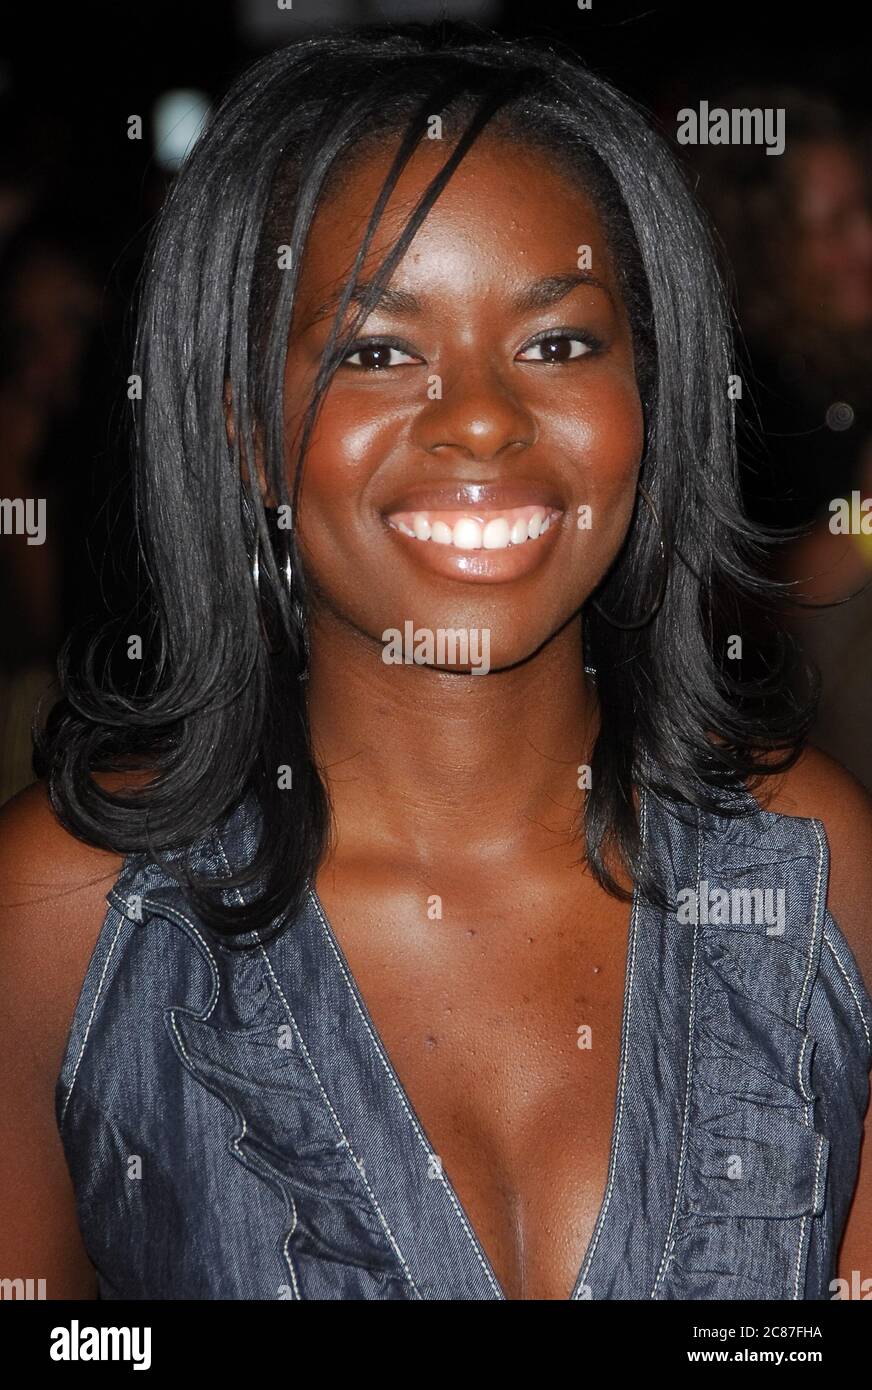 Camille Winbush at the Premiere of 'Somebody Help Me' held at the Grauman's Chinese Theater in Hollywood, CA. The event took place on Thursday, October25, 2007. Photo by: SBM / PictureLux- File Reference # 34006-9891SBMPLX Stock Photo